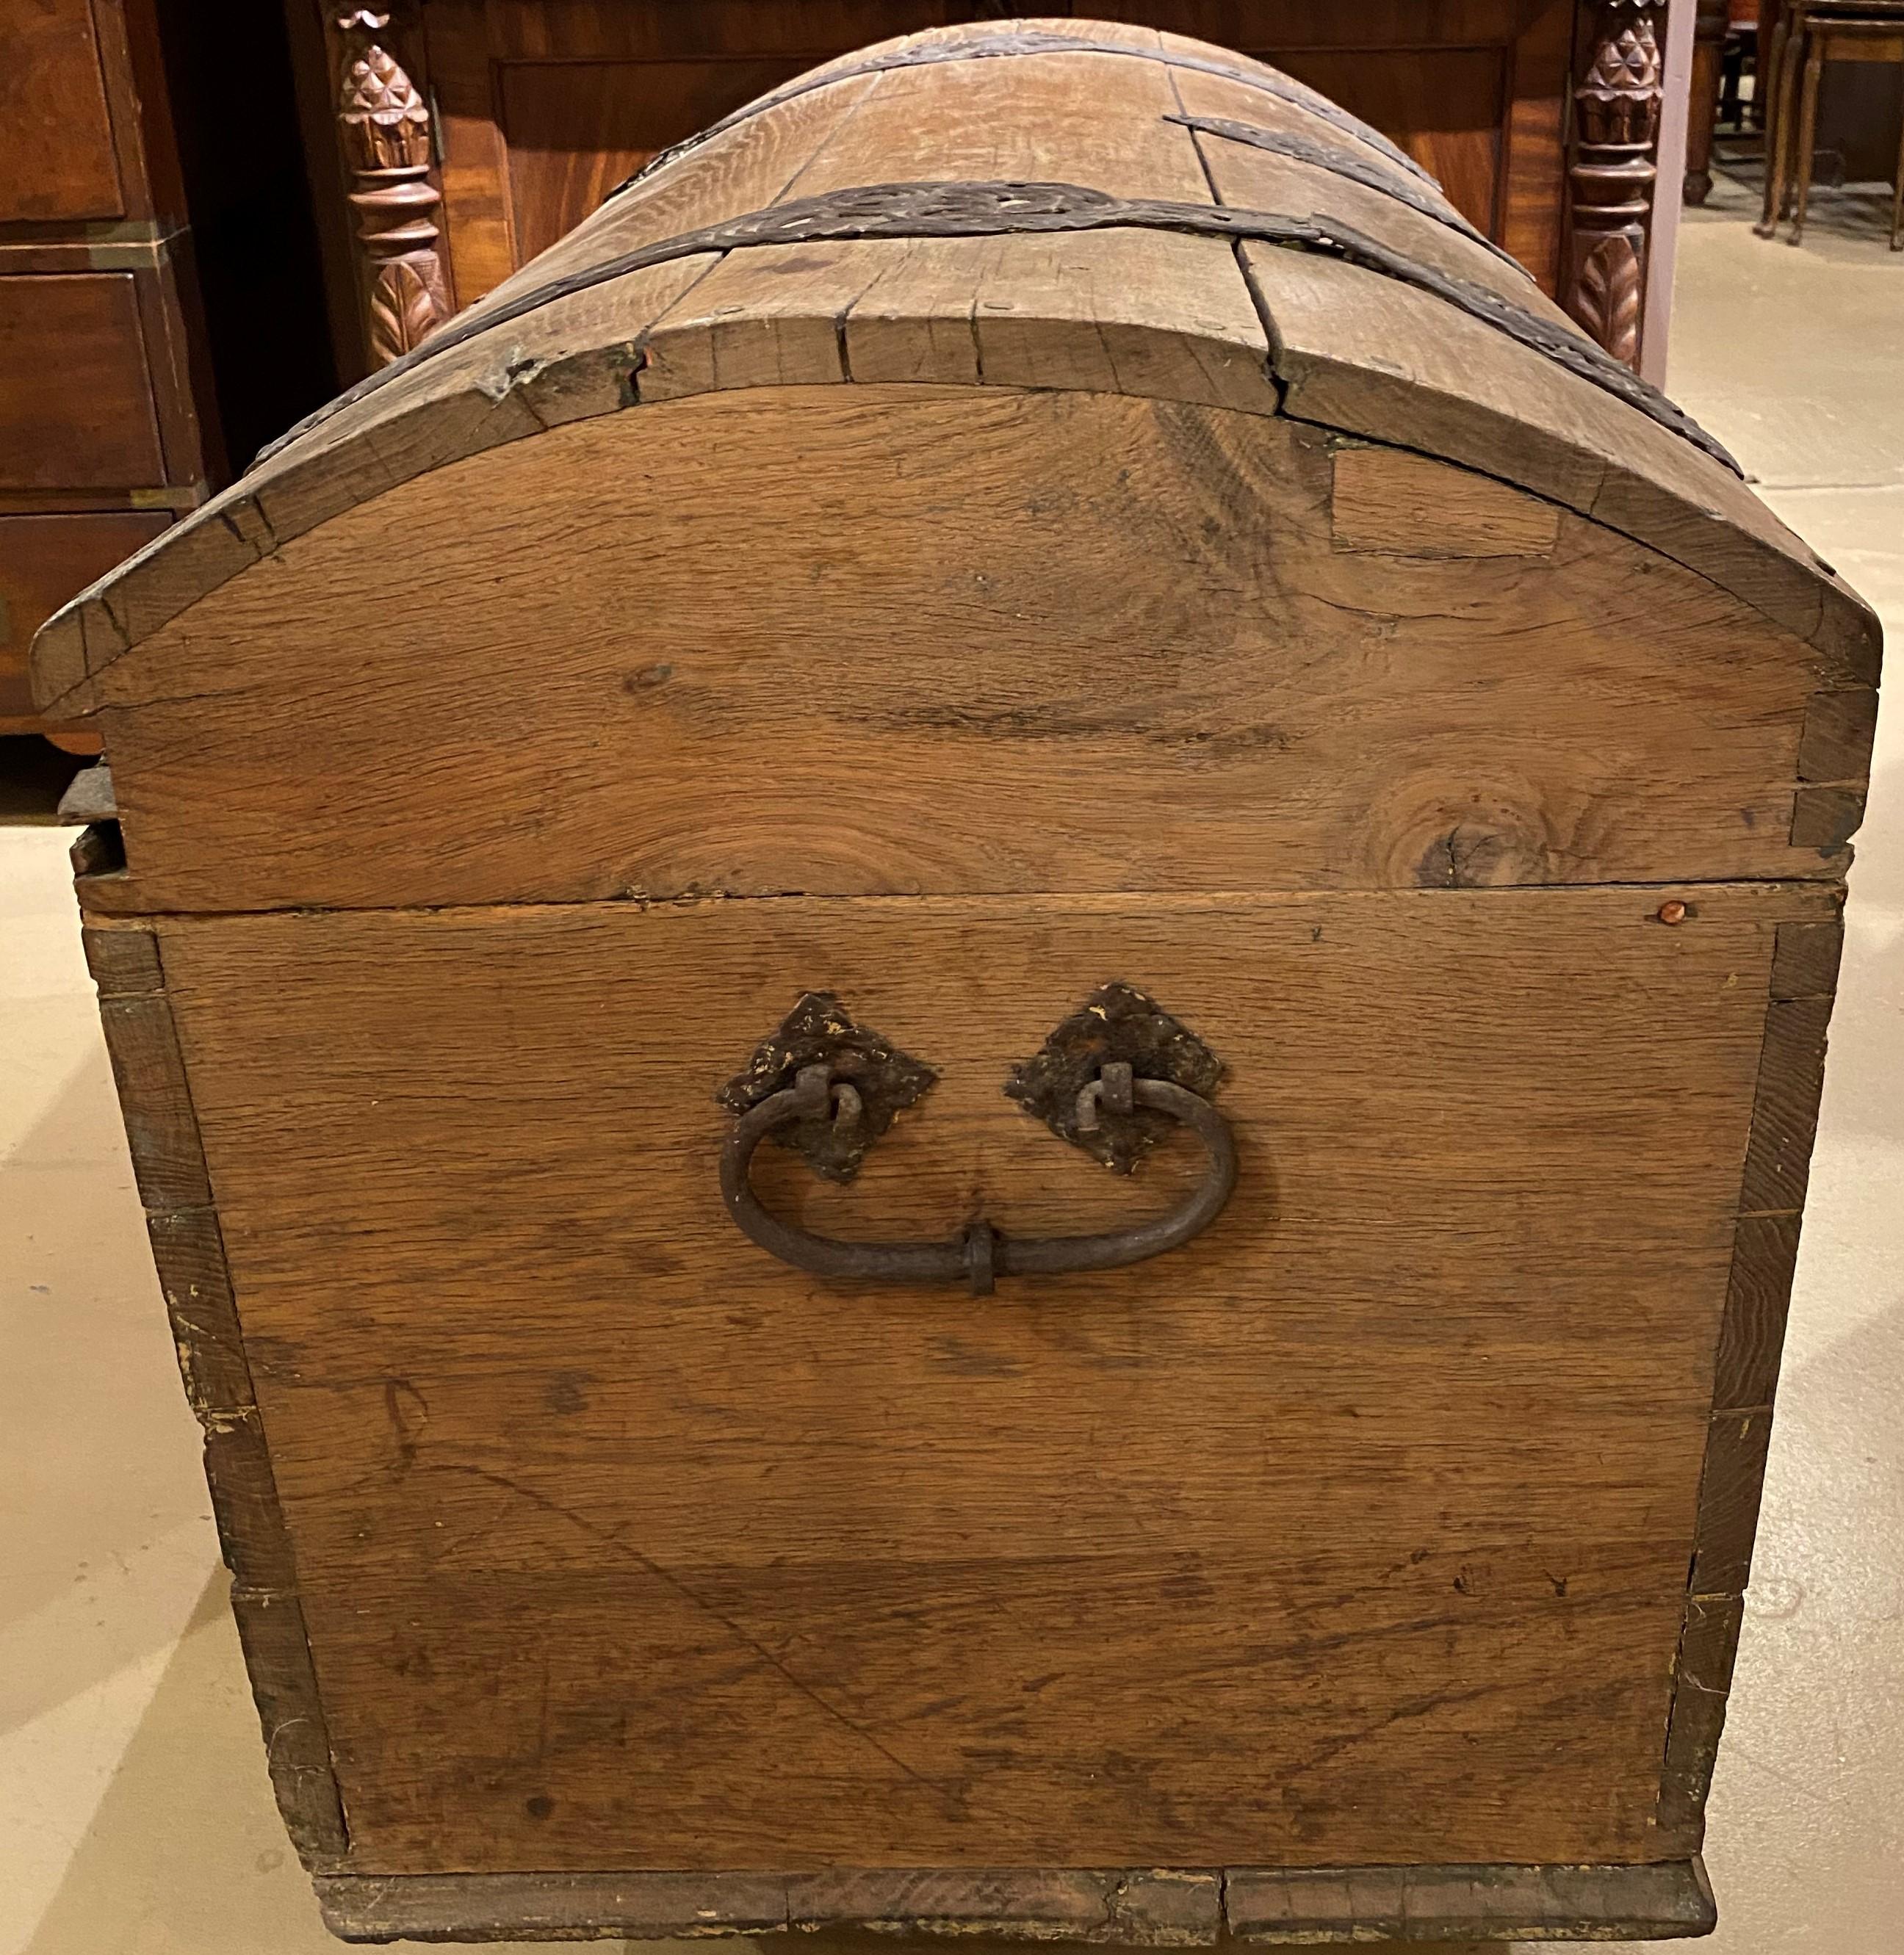 European 18th Century Continental Oak Dome Top Trunk with Fabulous Metalwork